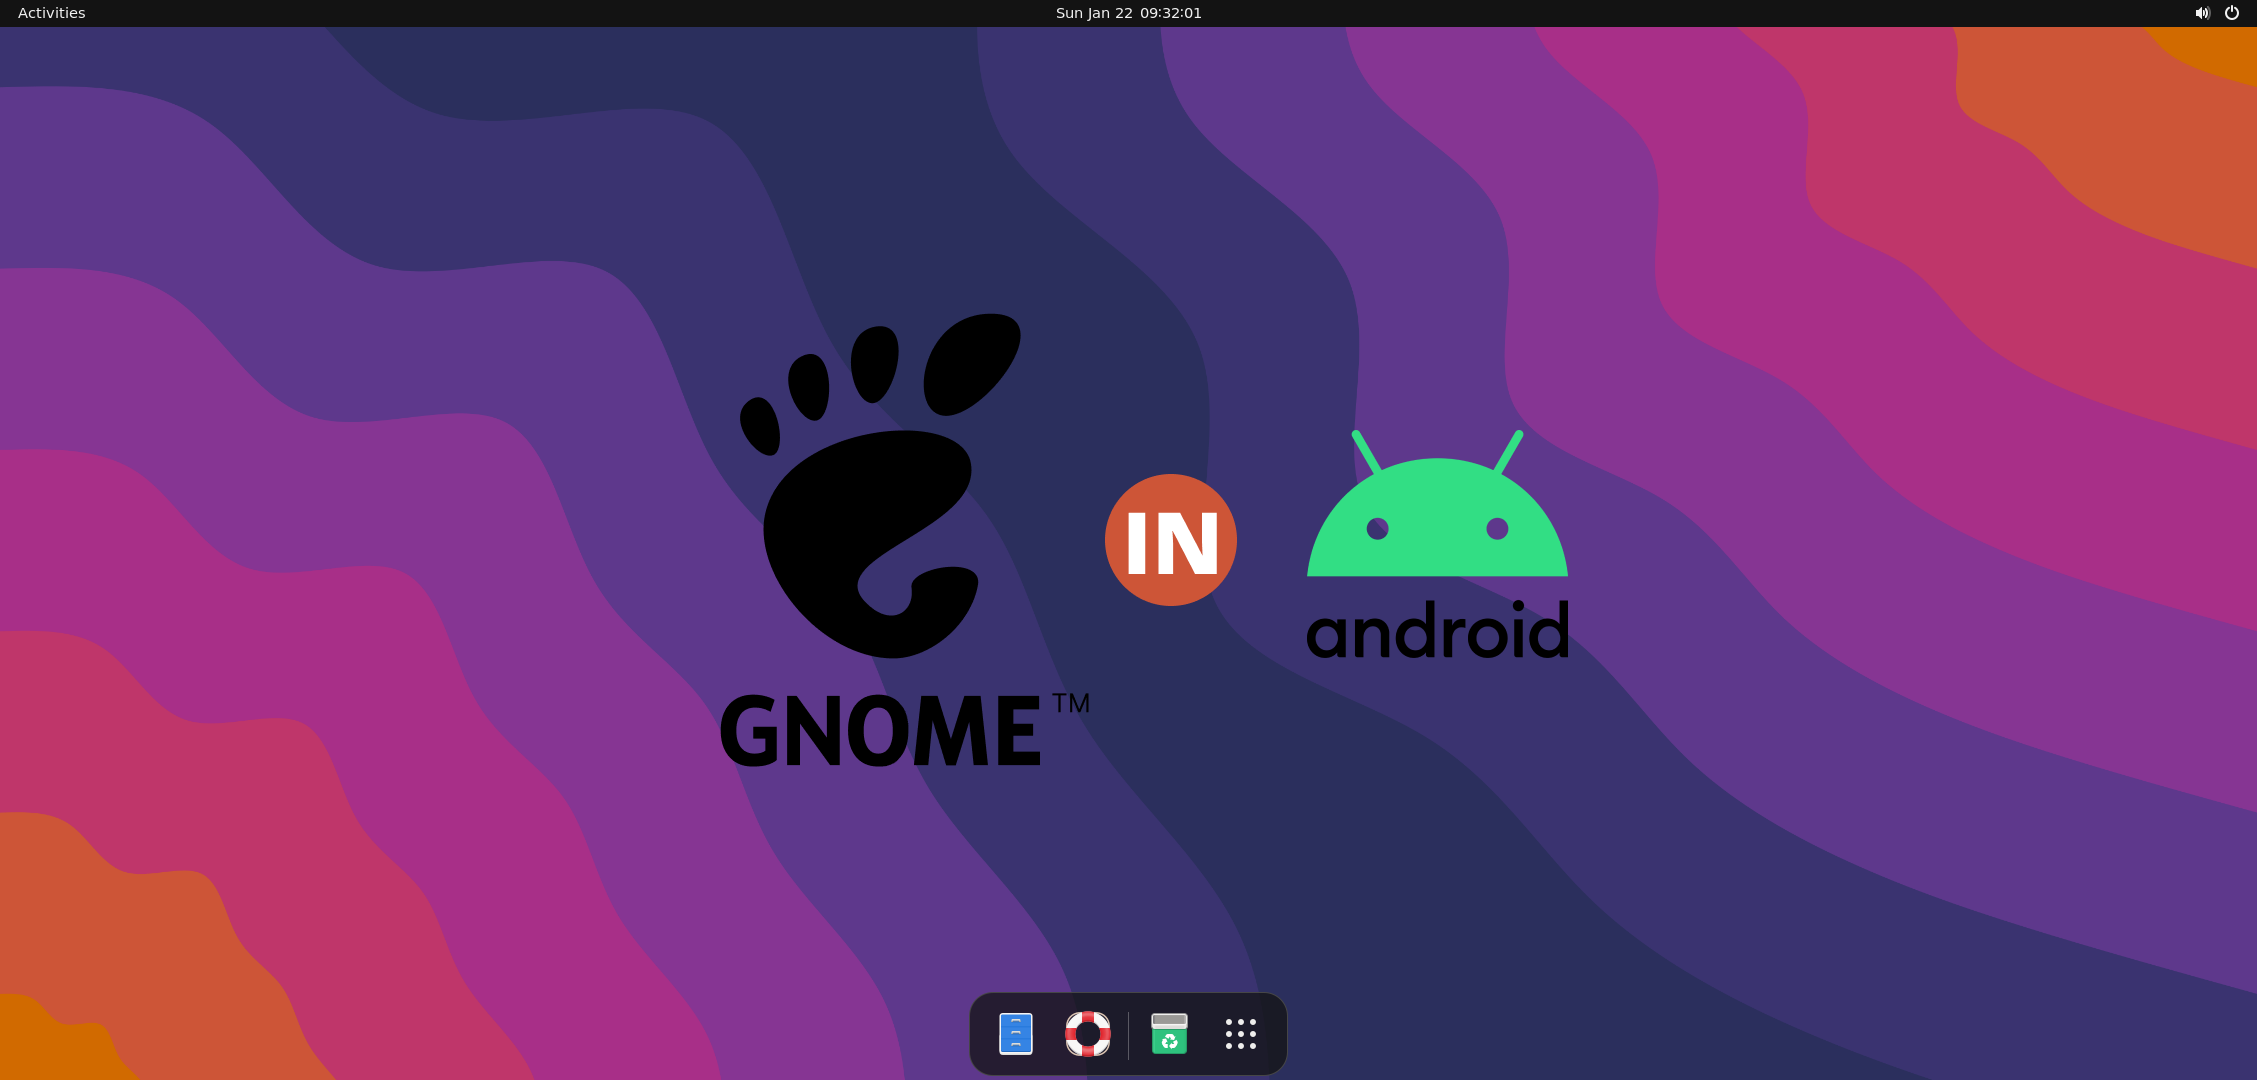 Gnome in android